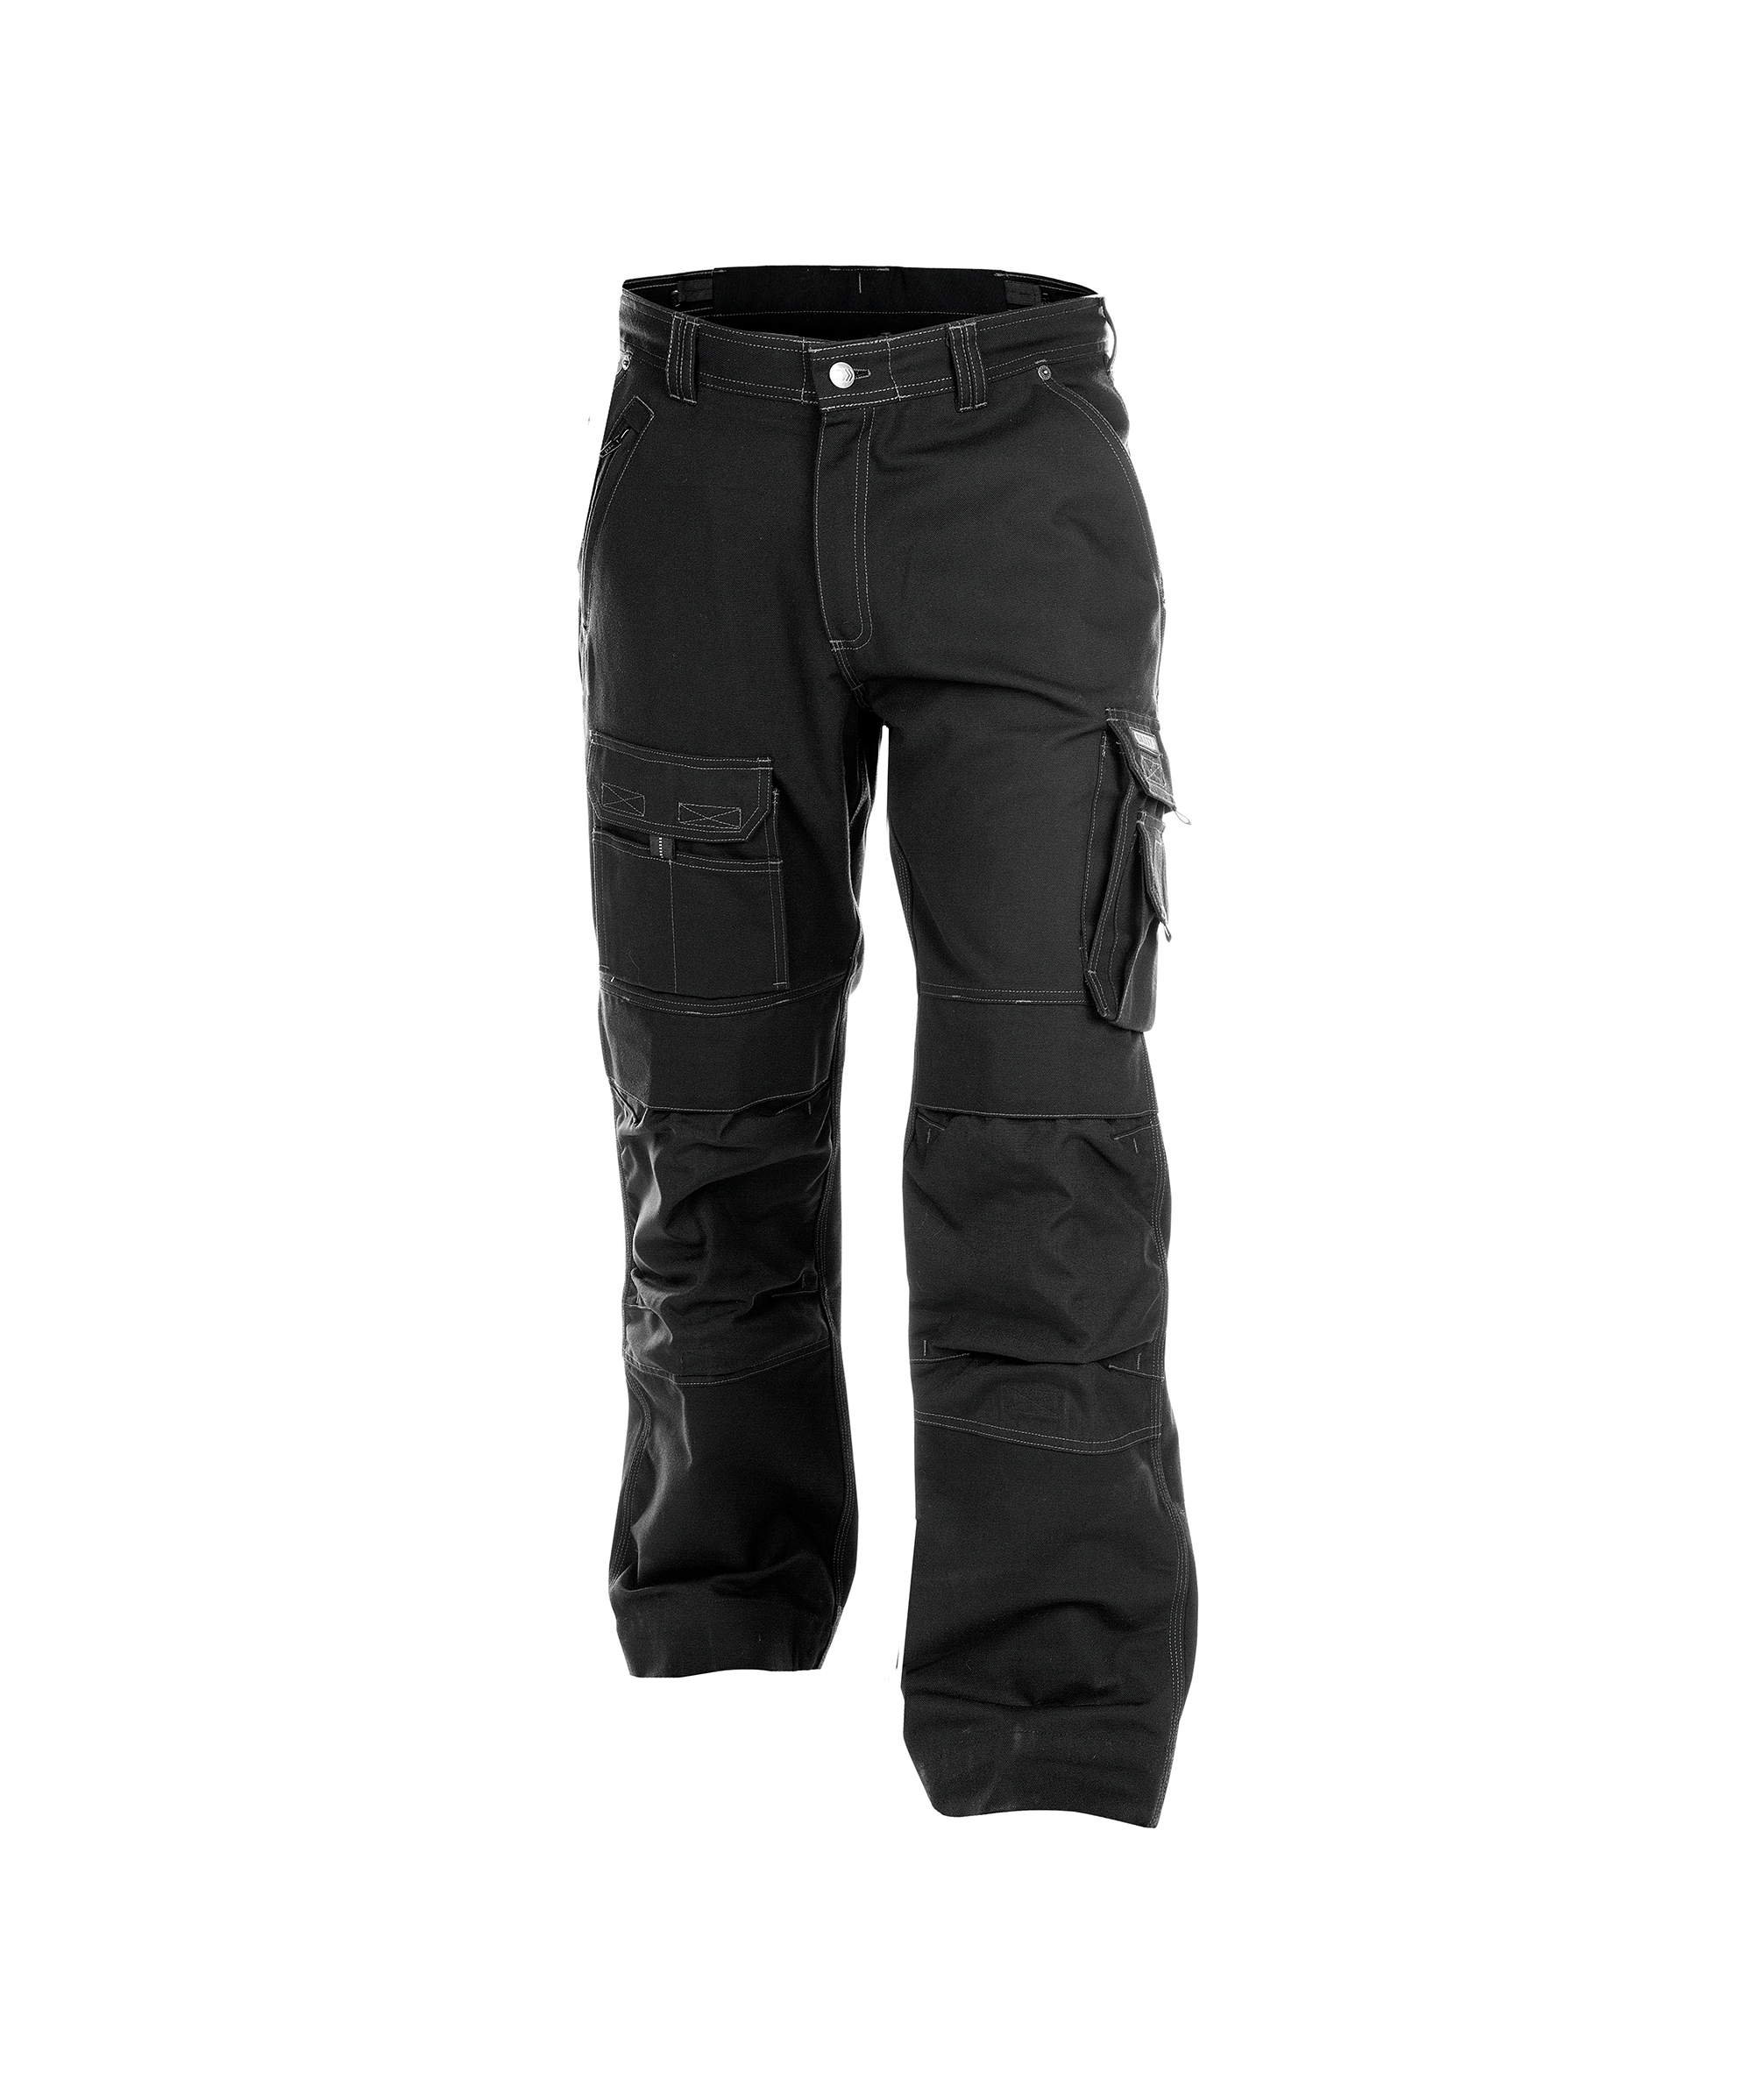 jackson_canvas-work-trousers-with-knee-pockets_black_front.jpg